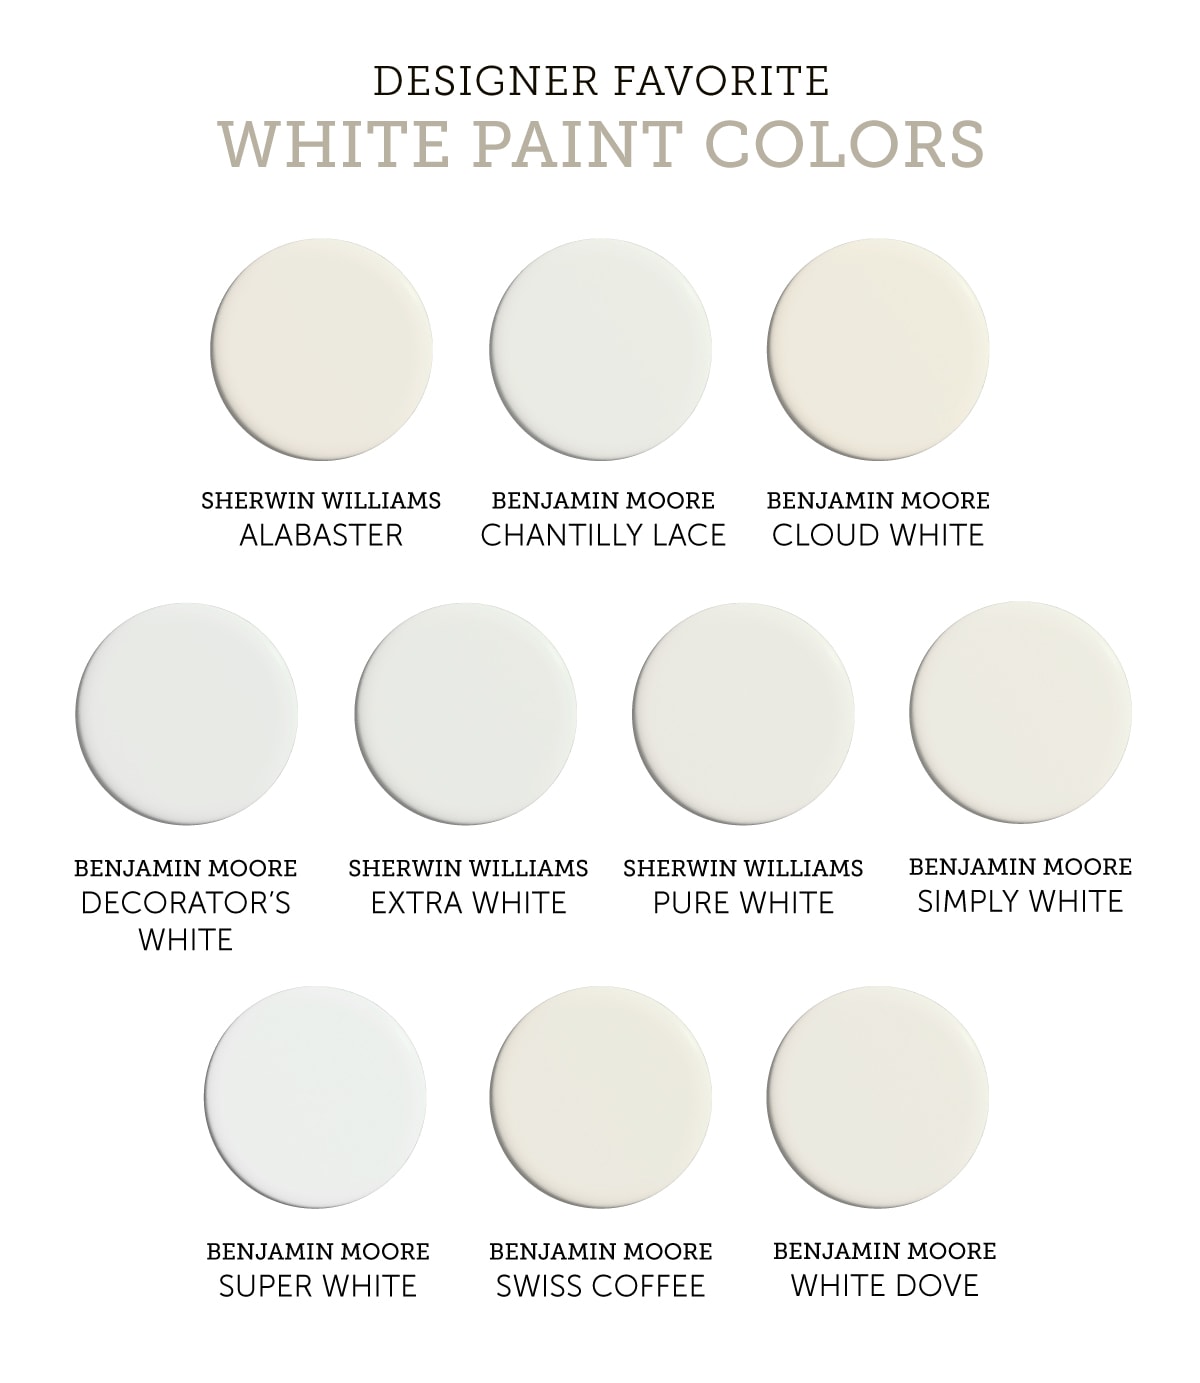 The Best White Paints According to Interior Designers